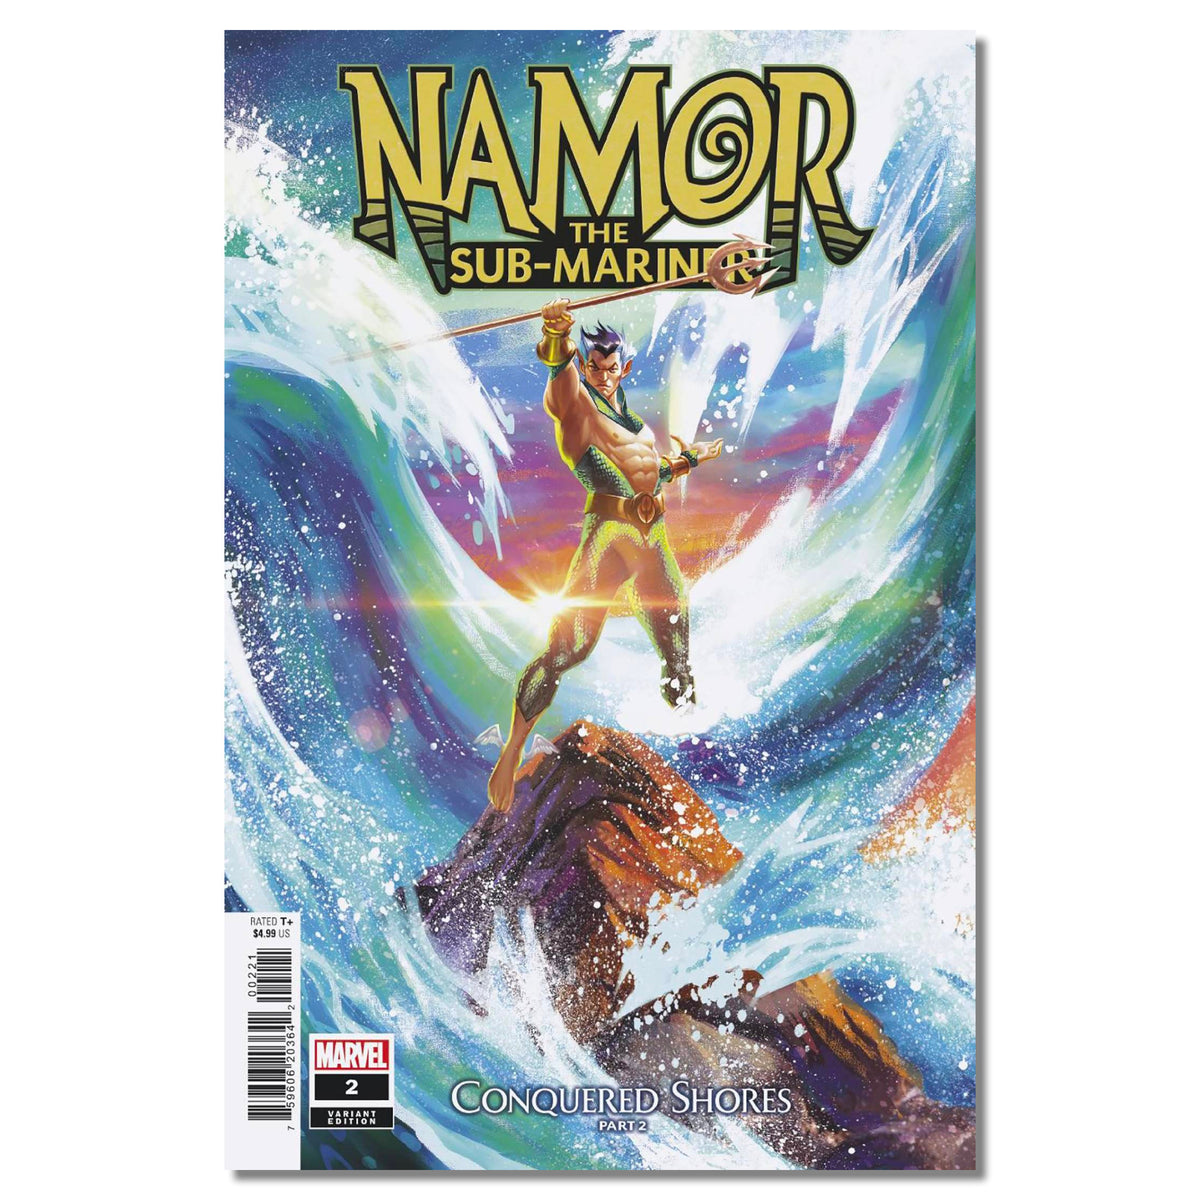 Namor Conquered Shores #2 (of 5) Manhanini Variant FINALSALE